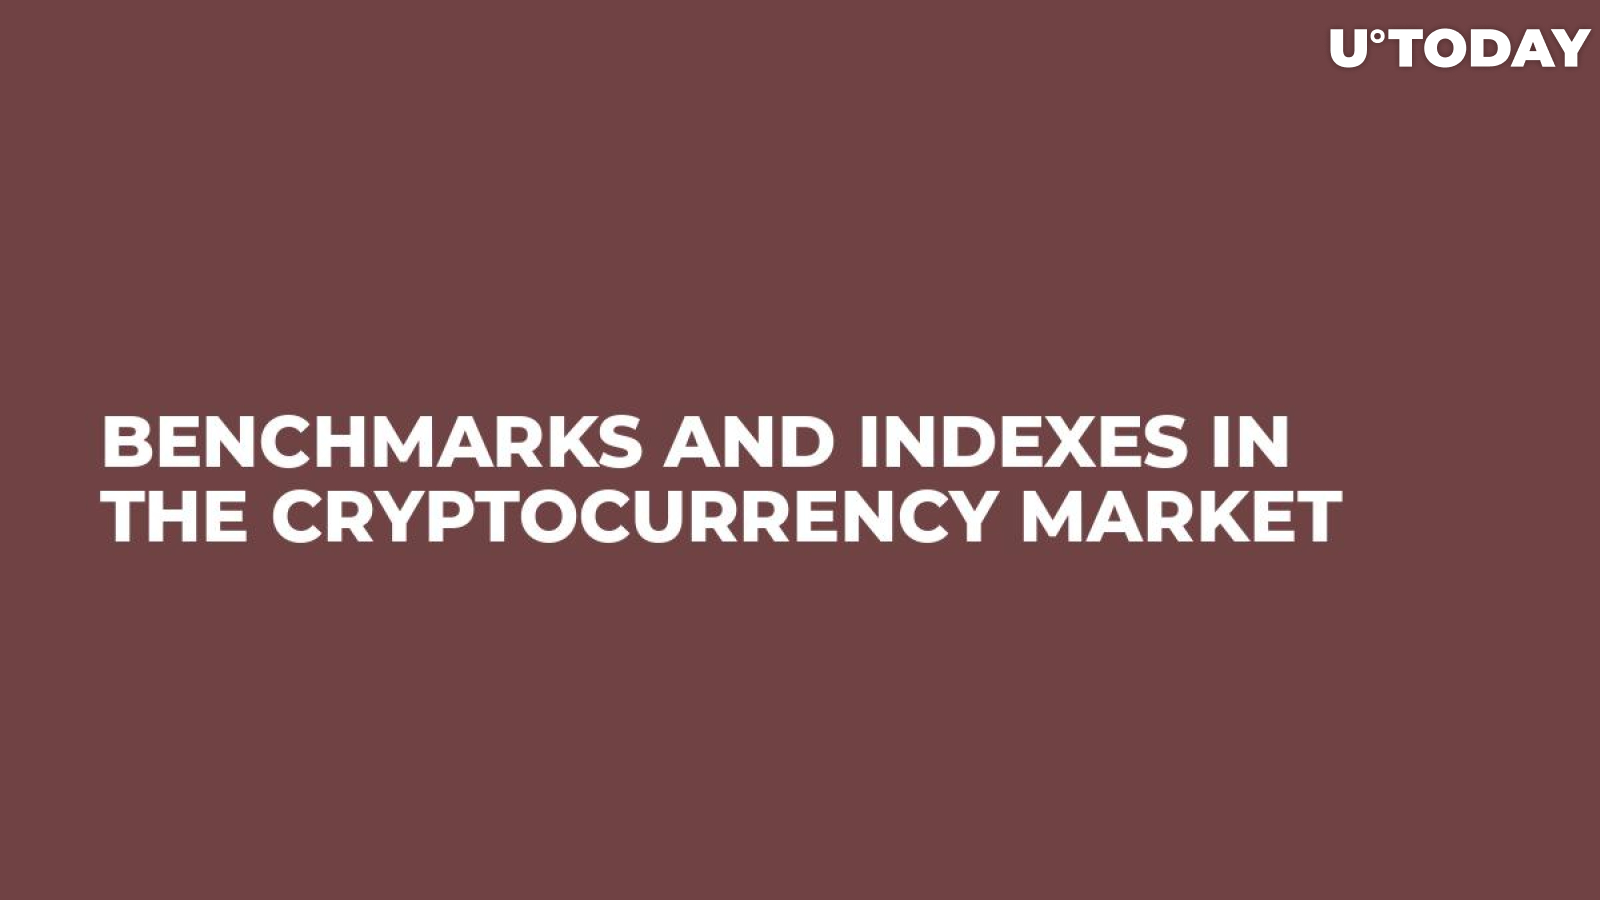 Benchmarks and Indexes in the Cryptocurrency Market